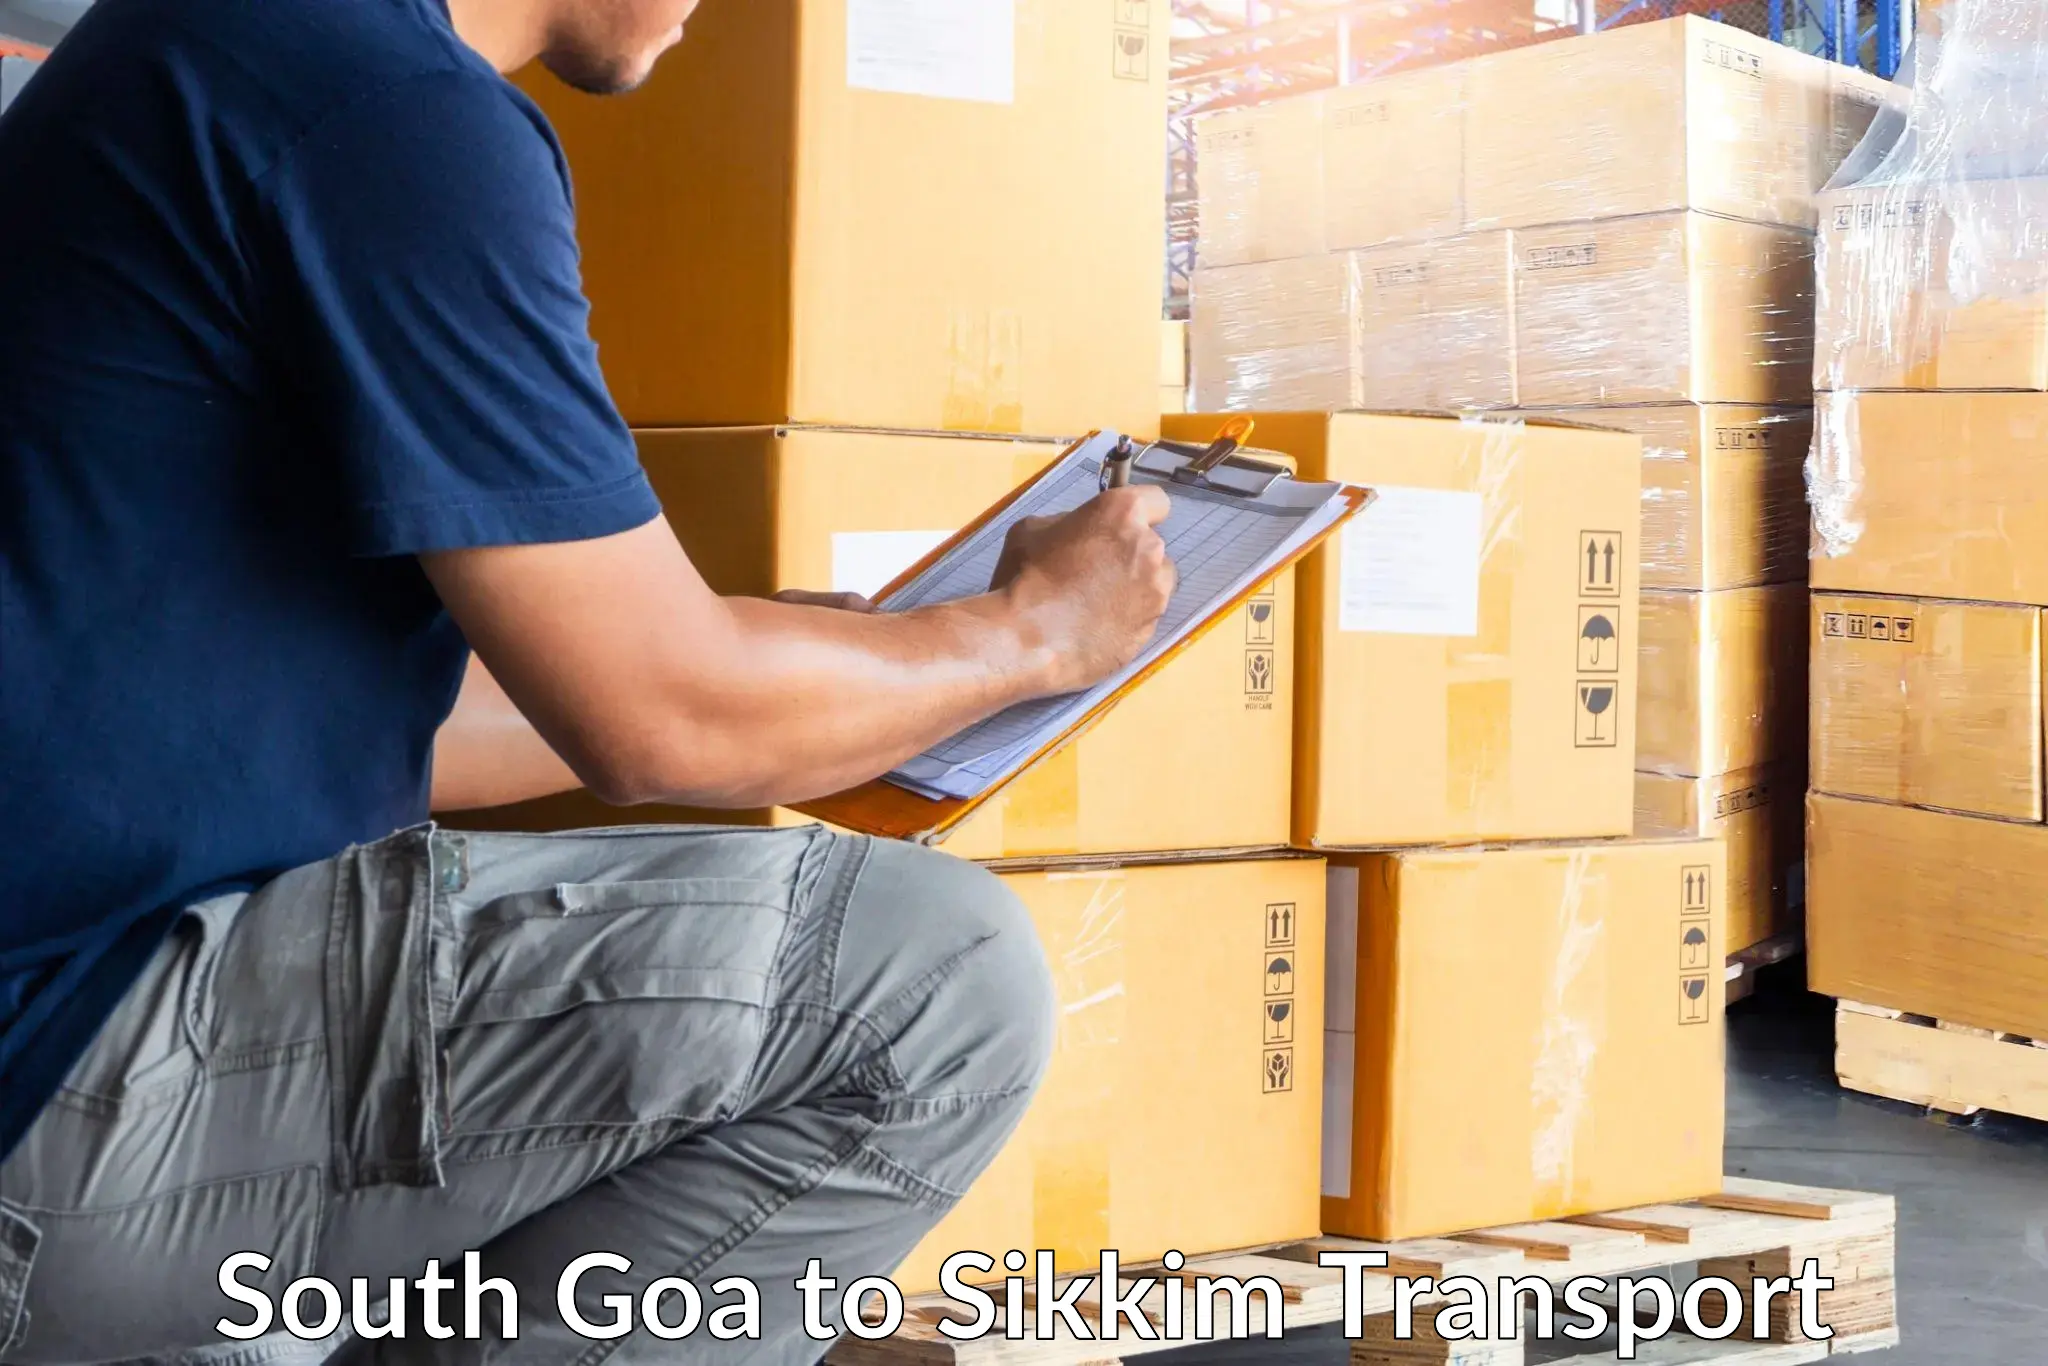 Delivery service South Goa to South Sikkim